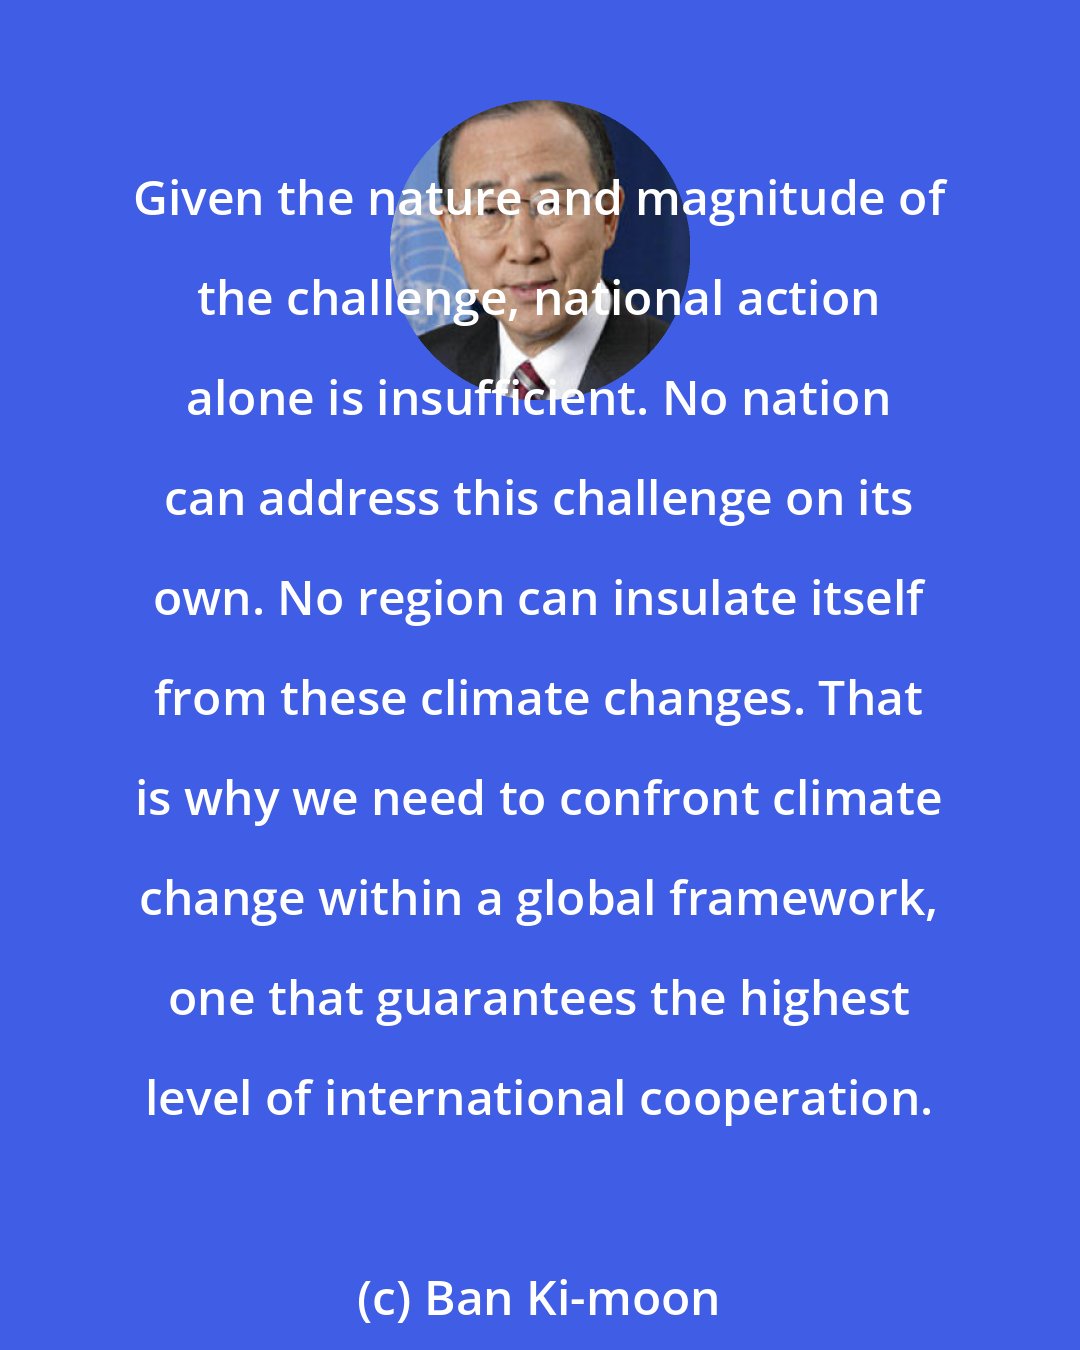 Ban Ki-moon: Given the nature and magnitude of the challenge, national action alone is insufficient. No nation can address this challenge on its own. No region can insulate itself from these climate changes. That is why we need to confront climate change within a global framework, one that guarantees the highest level of international cooperation.